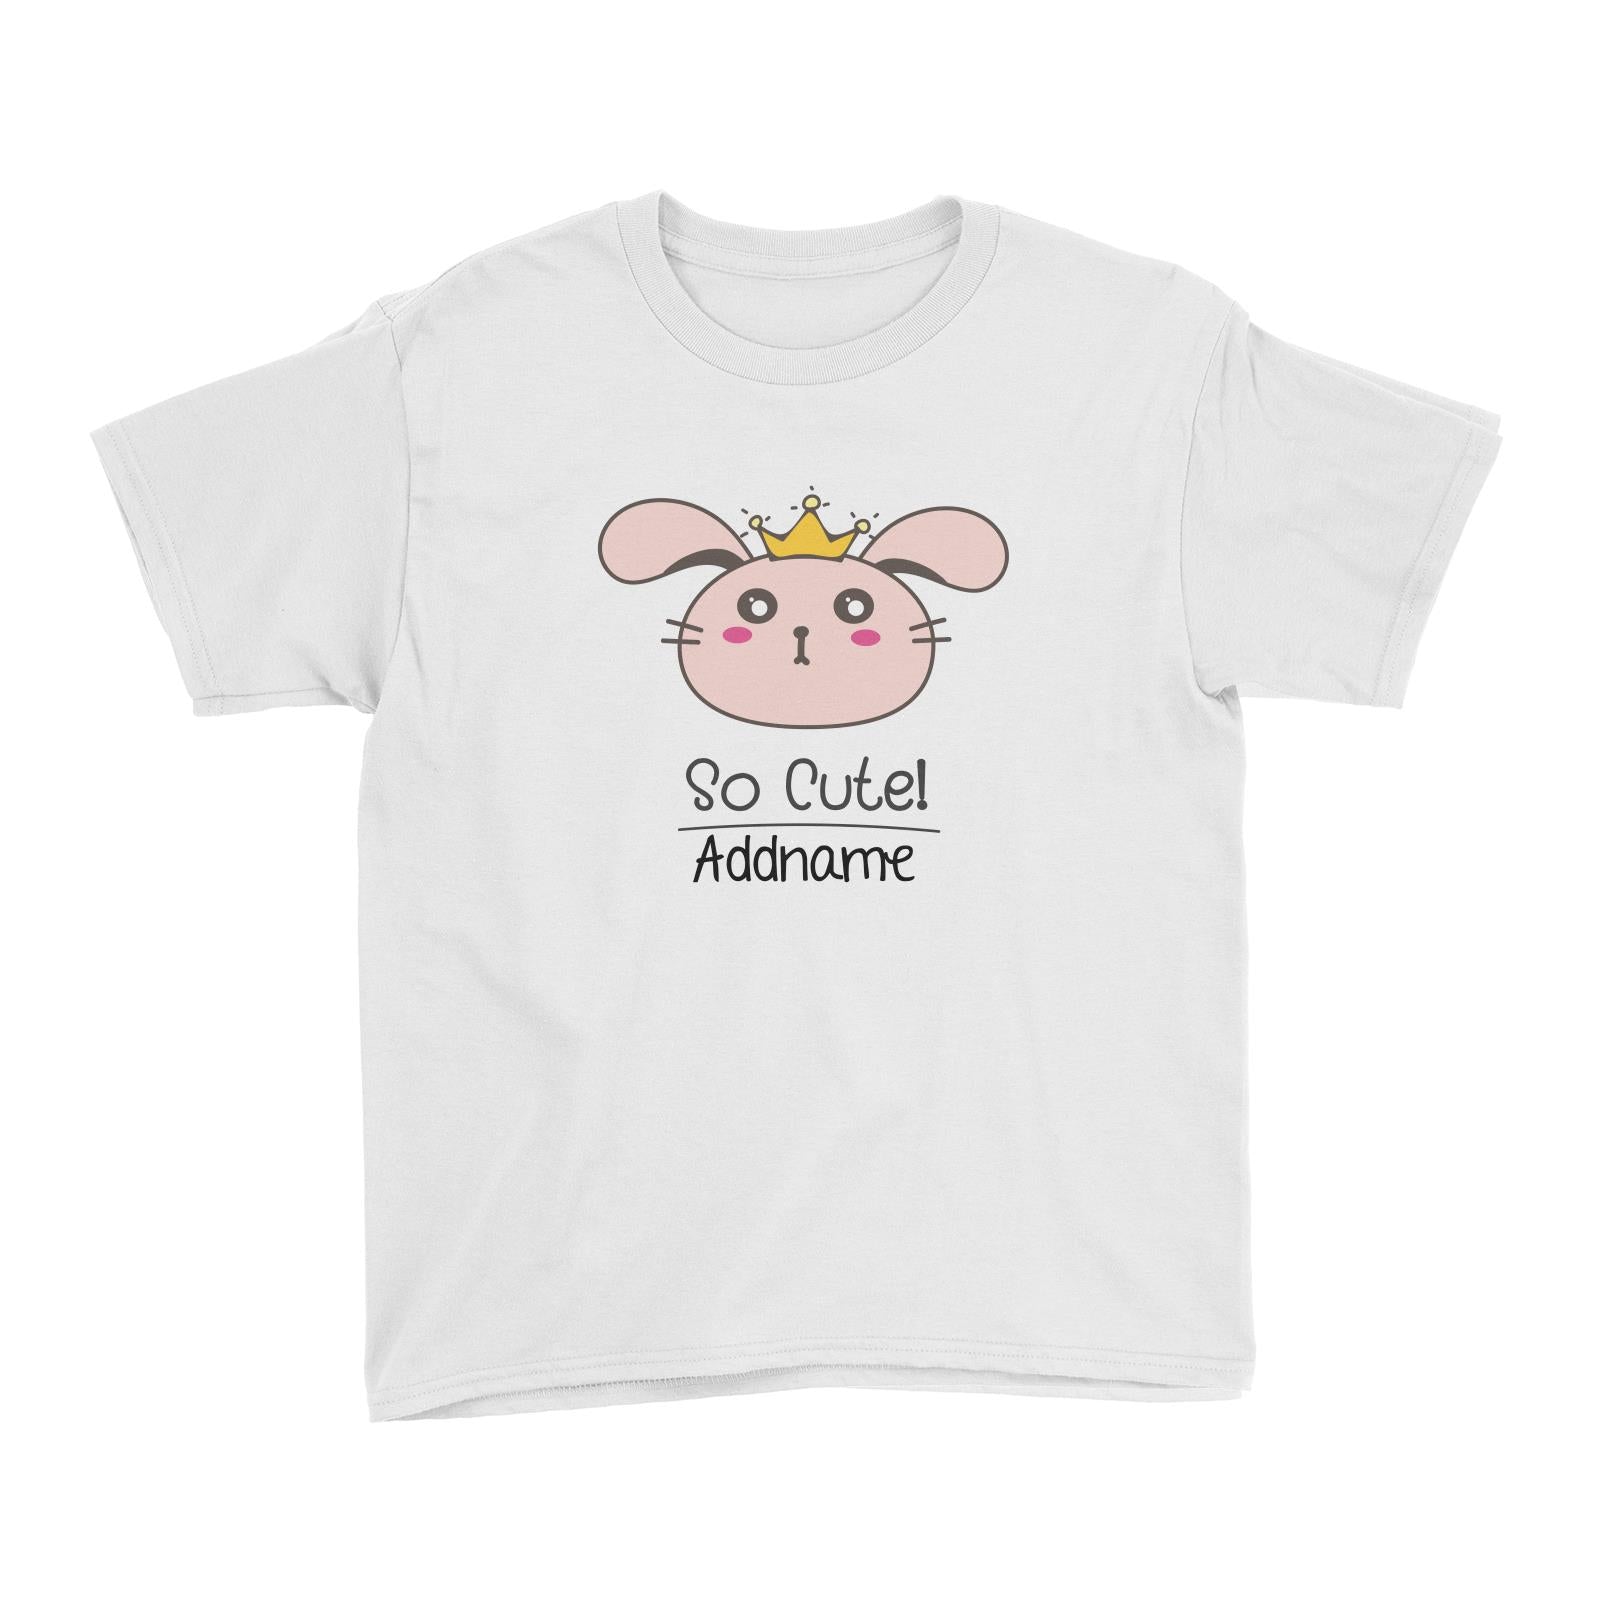 Cute Animals And Friends Series Cute Bunny With Crown Addname Kid's T-Shirt